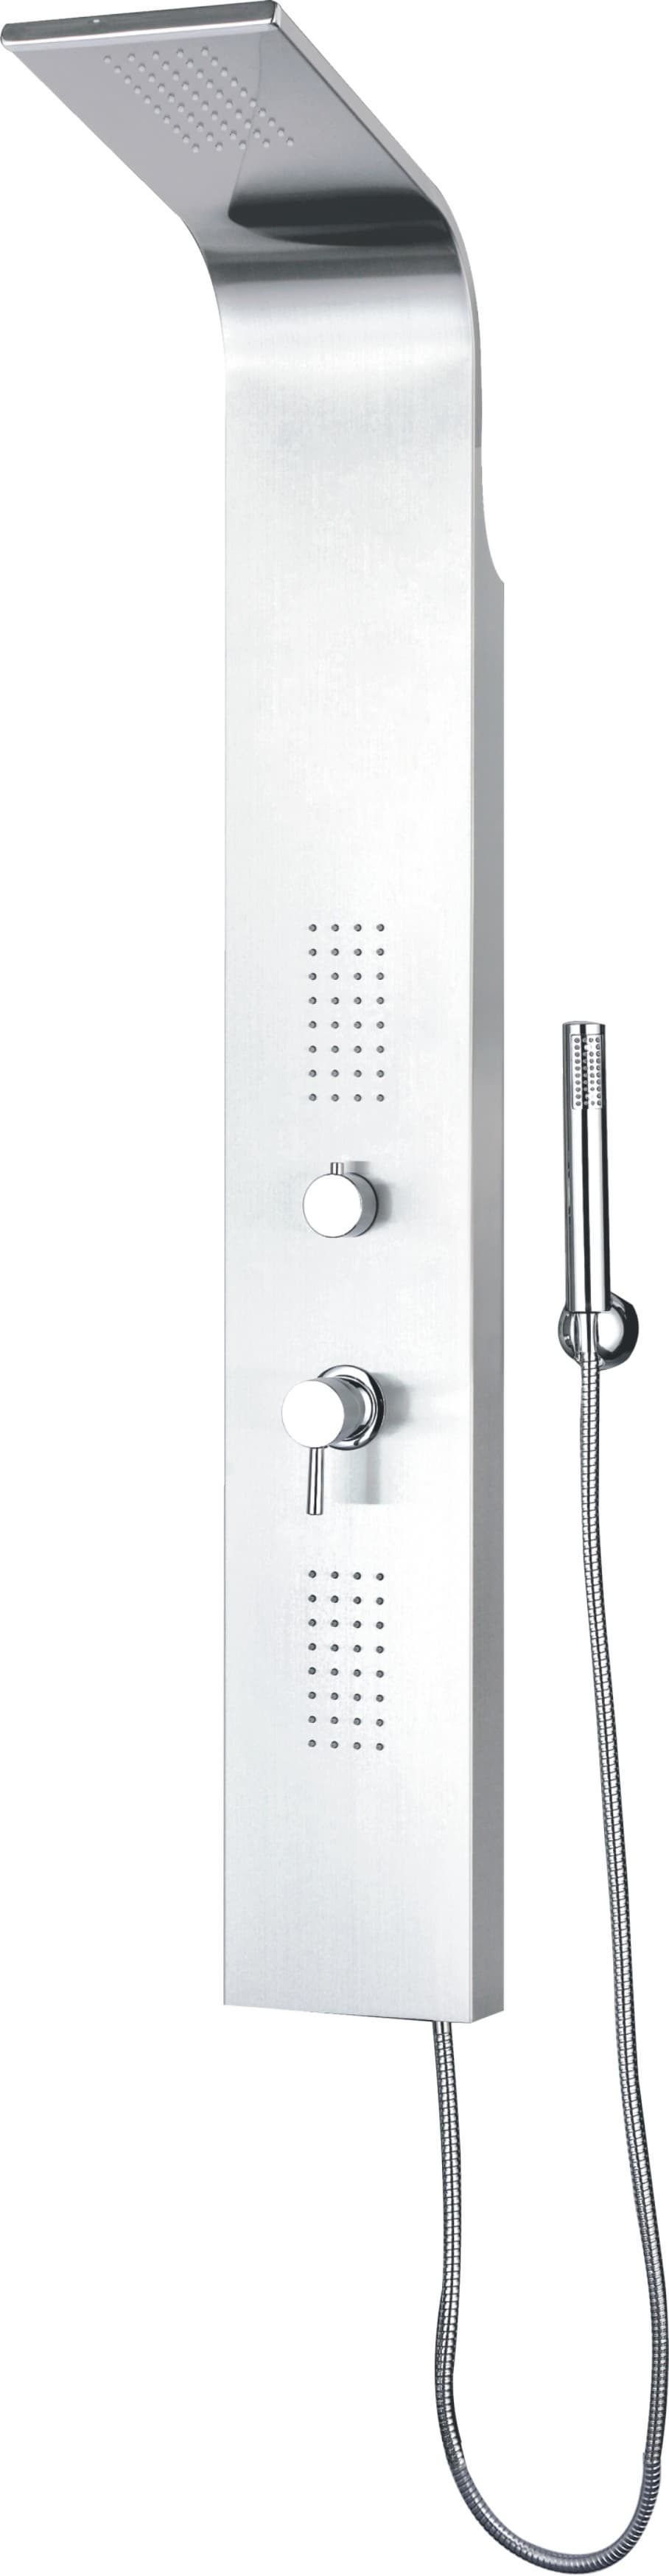 #304 stainless steel shower panel